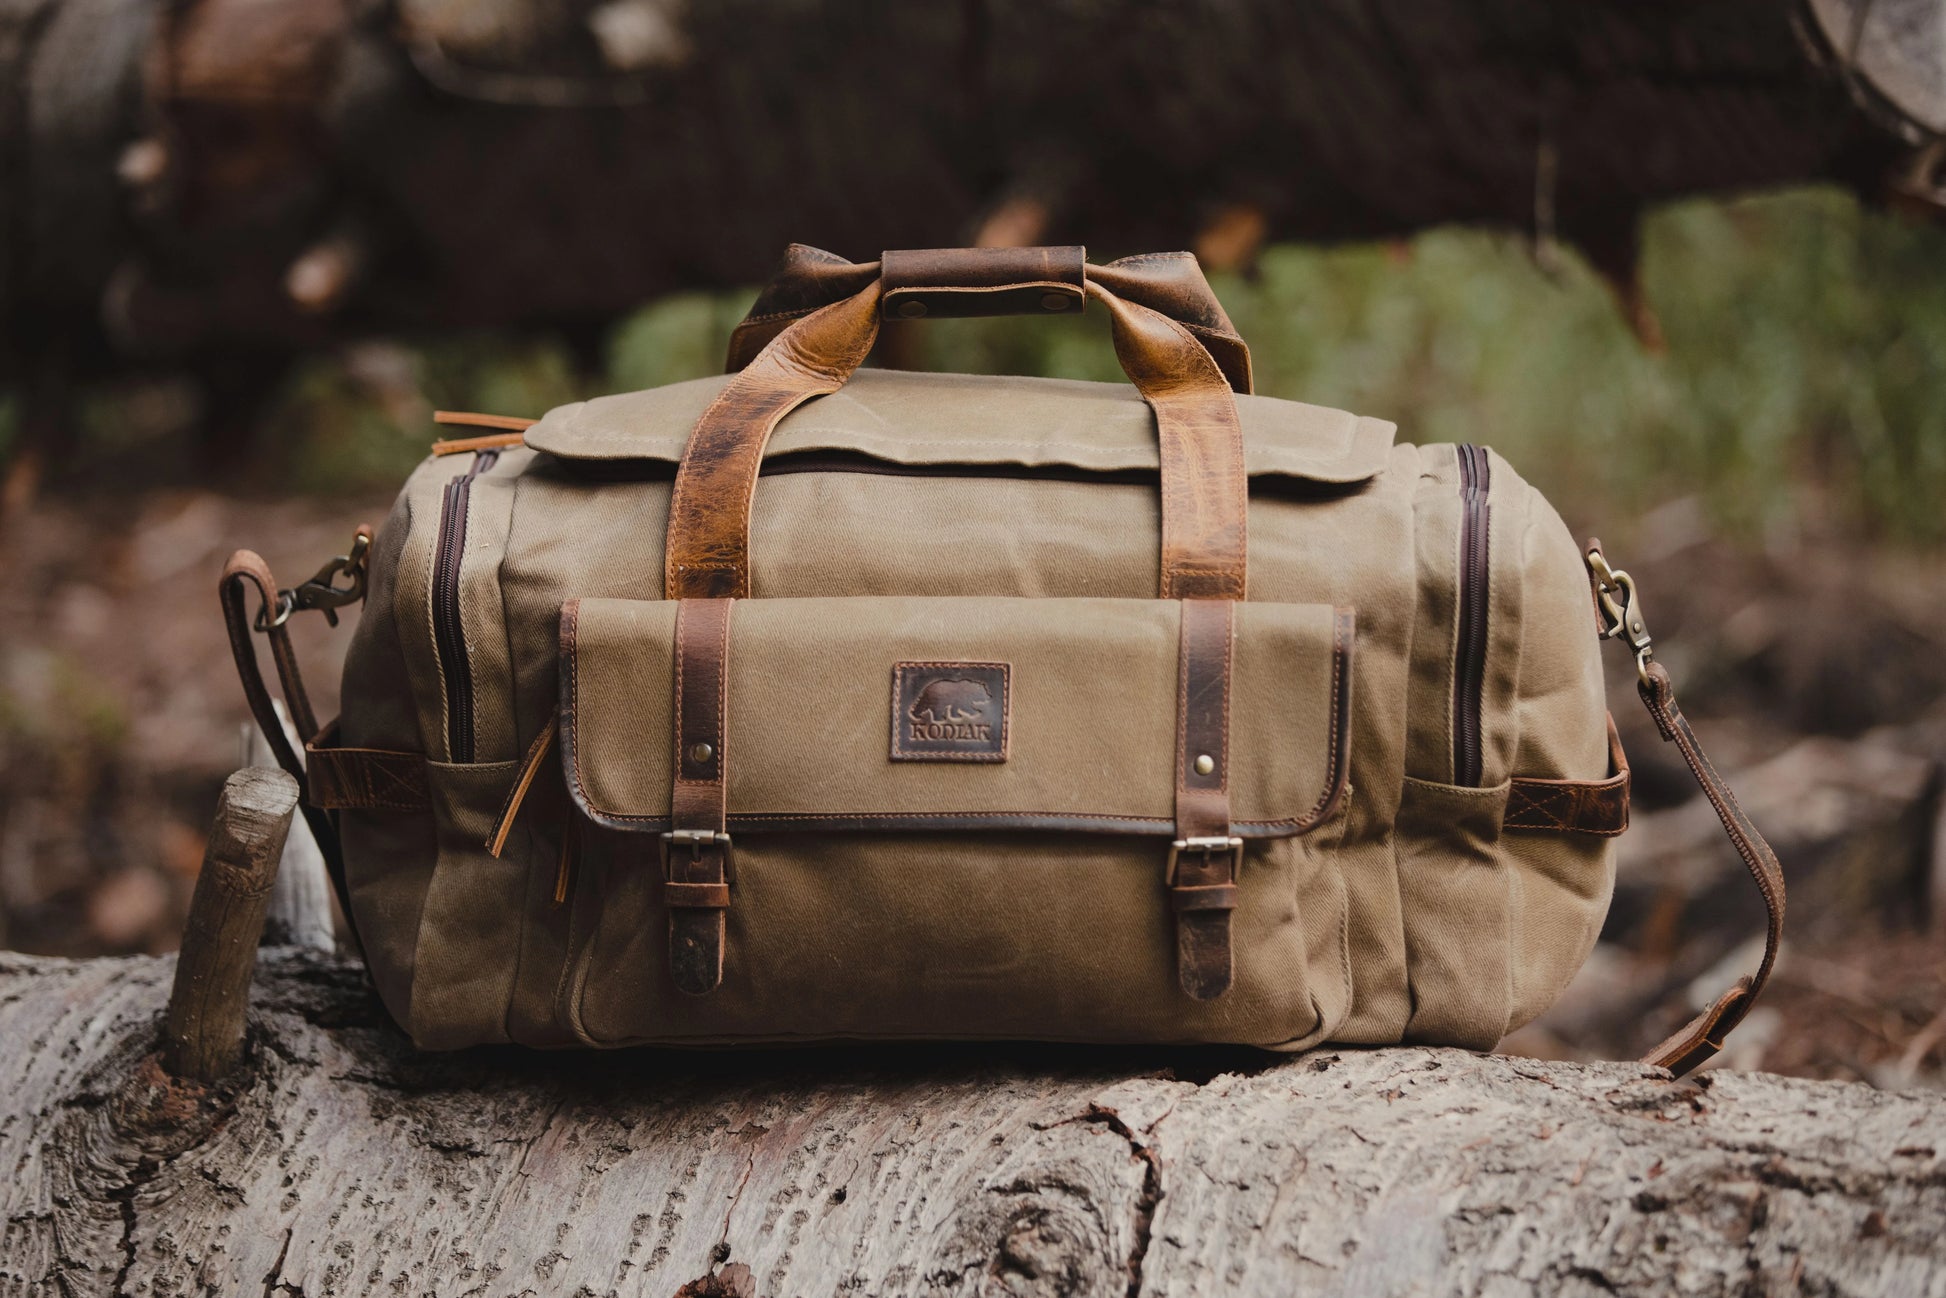 Canvas & Leather Duffel